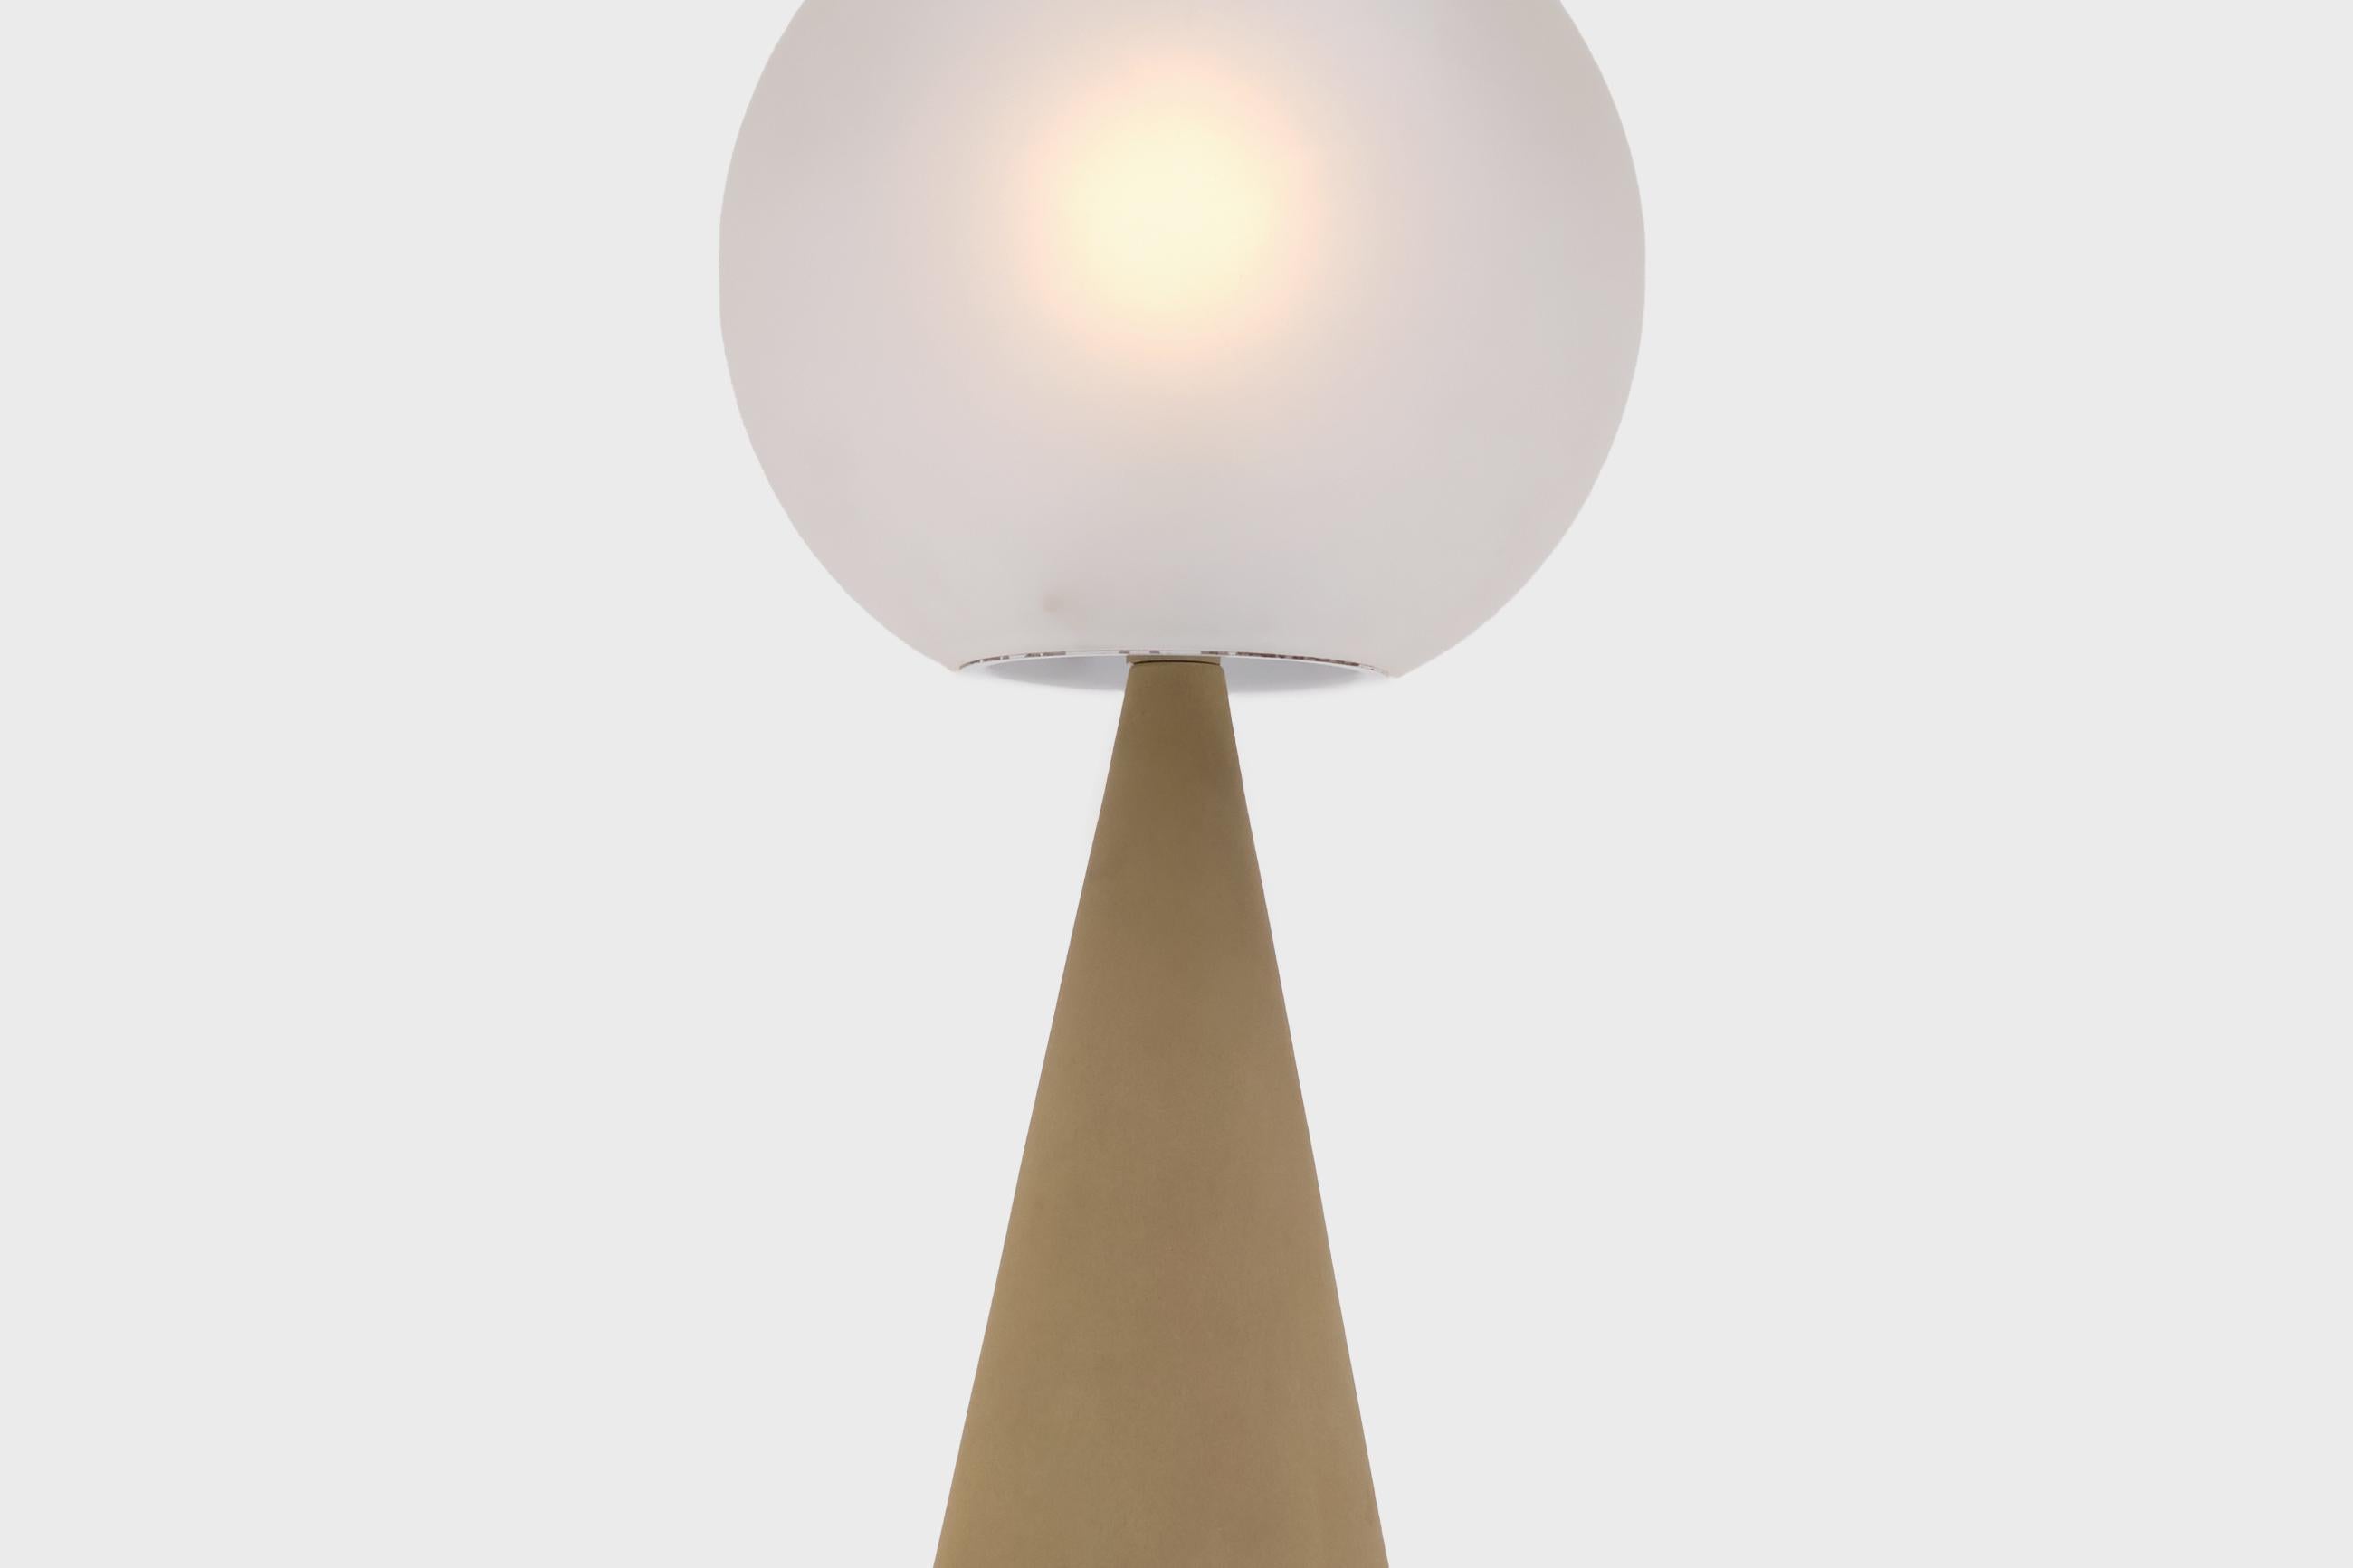 Rare early ‘Bilia’ table lamp mod. 2474 by Gio Ponti for Fontana Arte, Italy, circa 1960. Sophisticated design composed two primair shapes; a cone and a sphere. The cone is made of aluminium and is finished with the original matt textured lacquer.